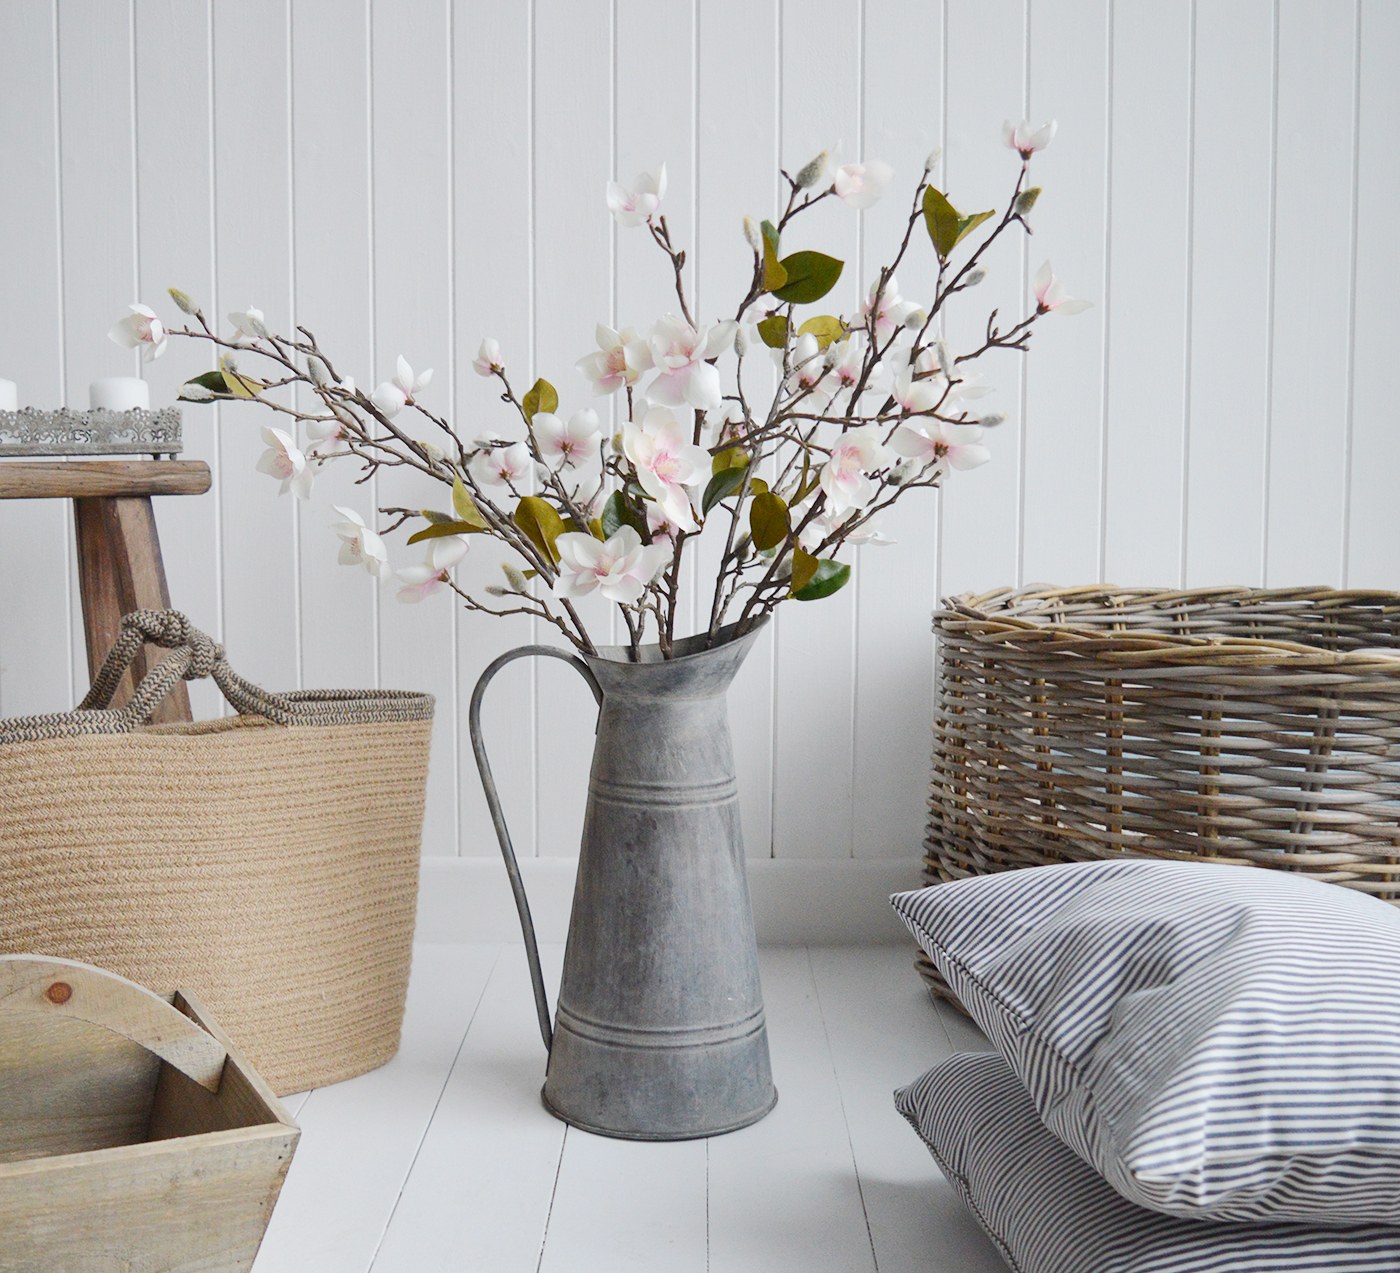 The White Lighthouse. White Furniture and accessories for the home. Artificial Magnolia Branch with Leaves, Flowers and buds